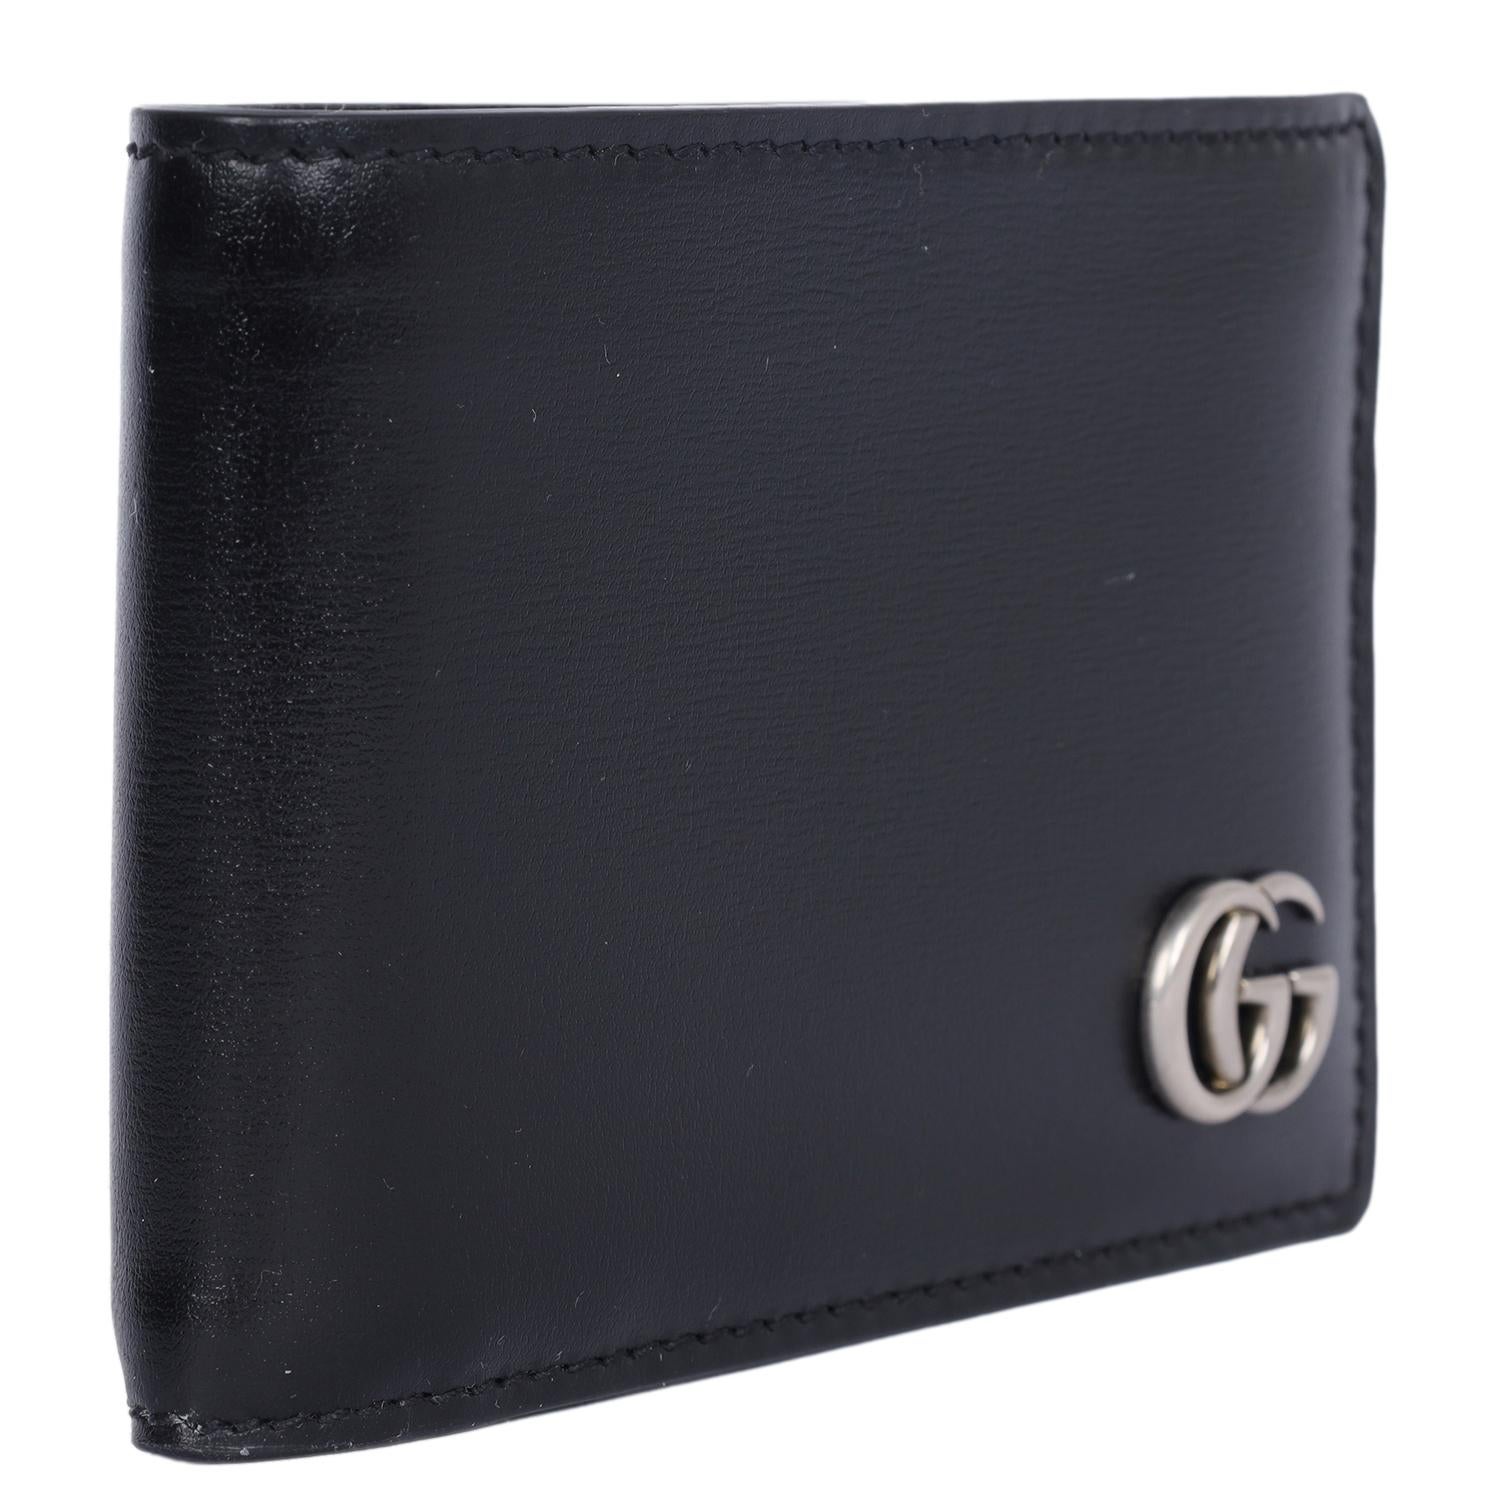 Gucci GG Marmont Black Leather Bi Fold Wallet In Excellent Condition For Sale In Salt Lake Cty, UT